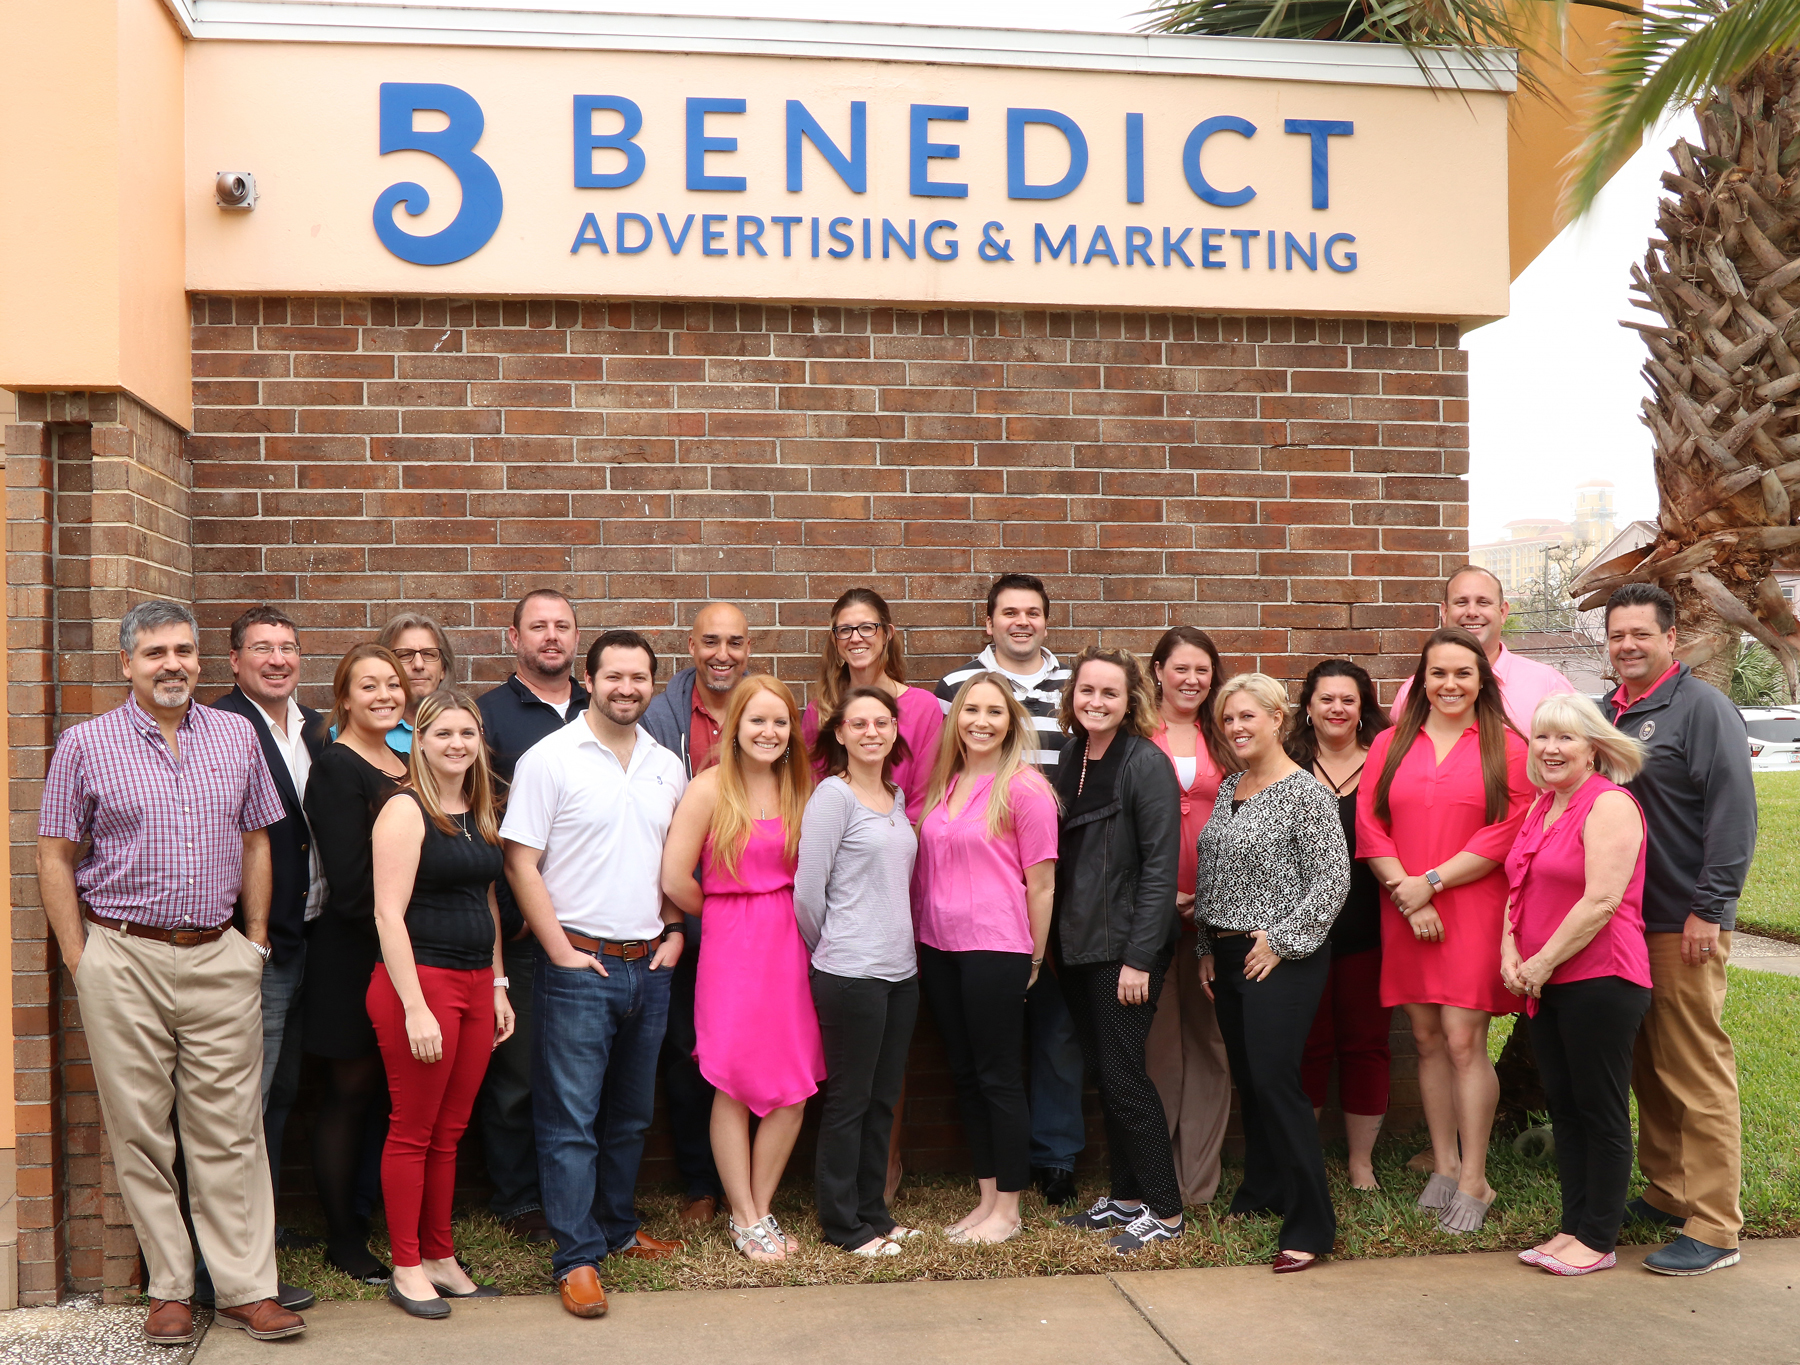 Benedict Advertising and Marketing celebrates 44 years in business. Courtesy photo